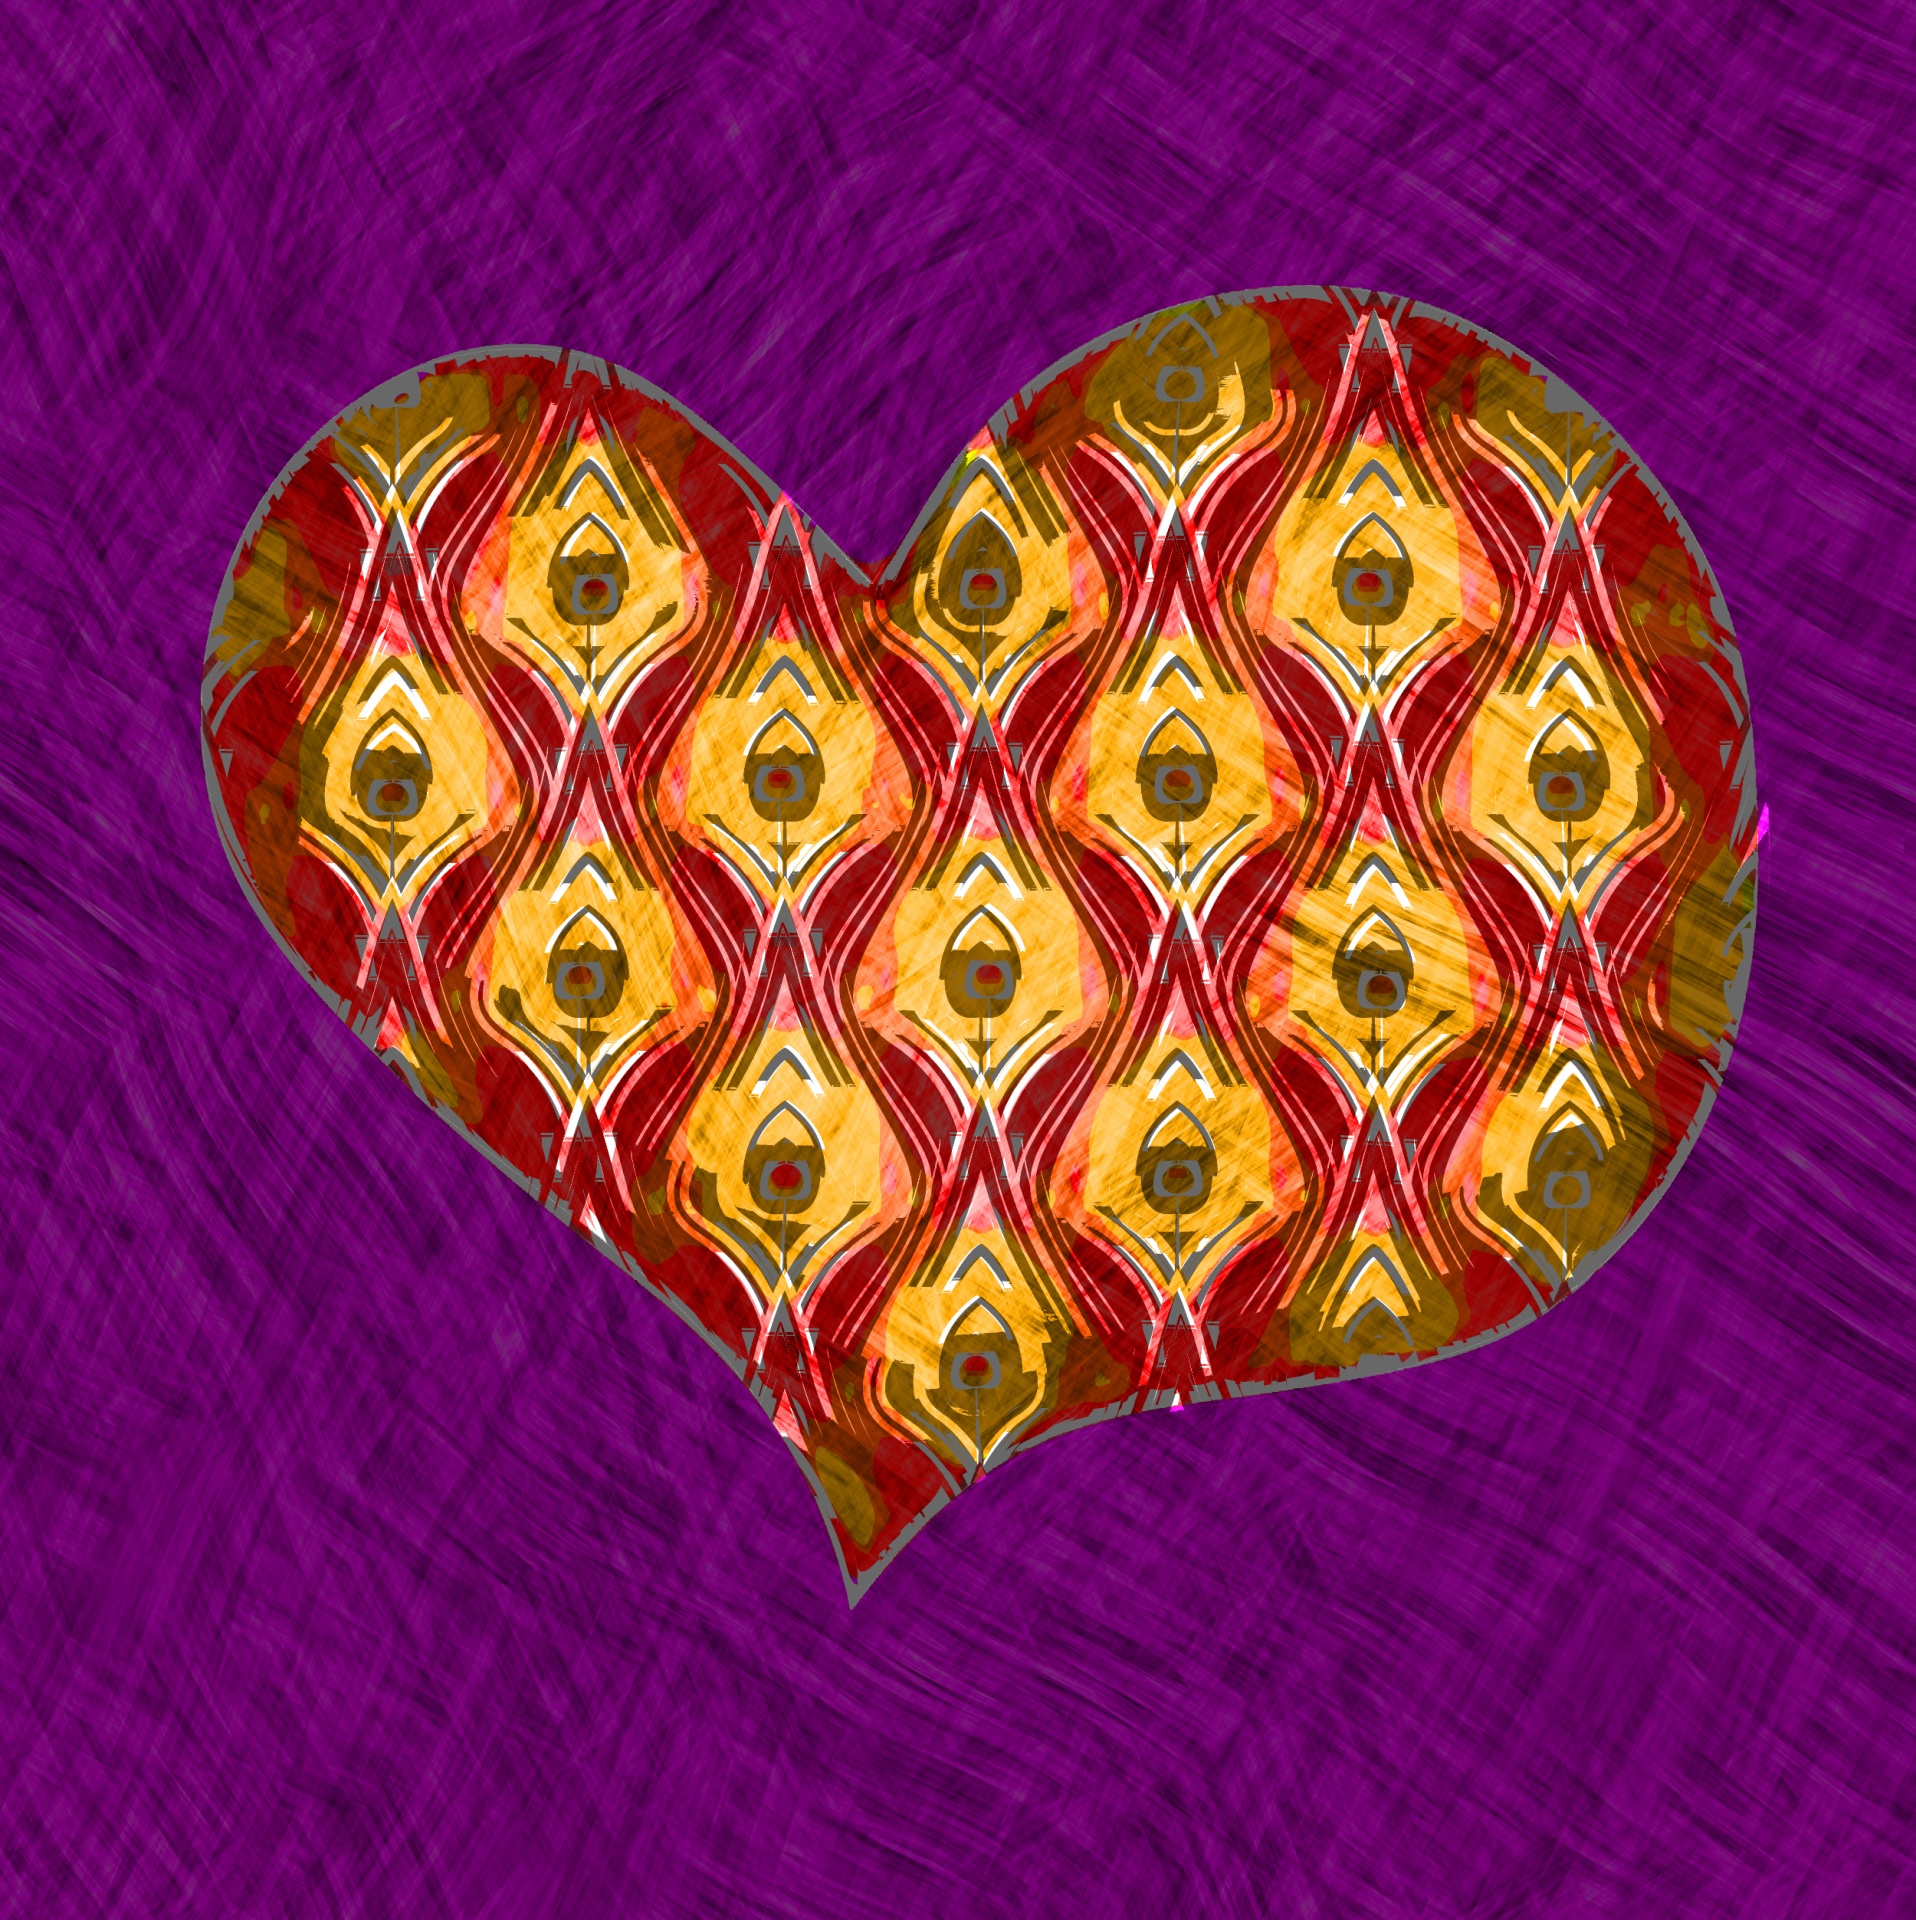 heart illustration with peacock feather pattern on purple background